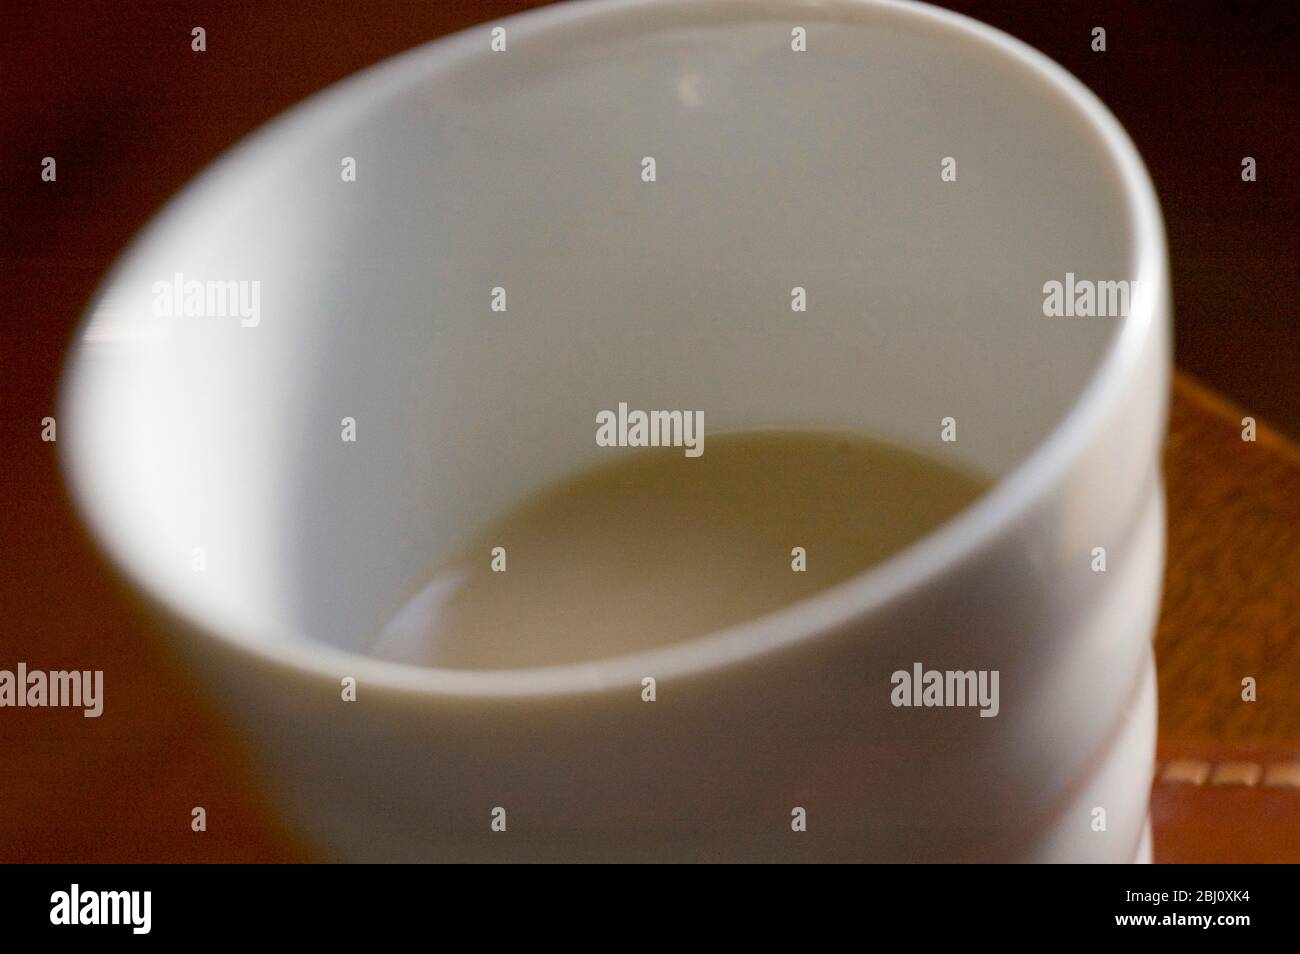 Half empty (or half full) mug os milky tea, shot with lensbaby lens for blurred effect - Stock Photo